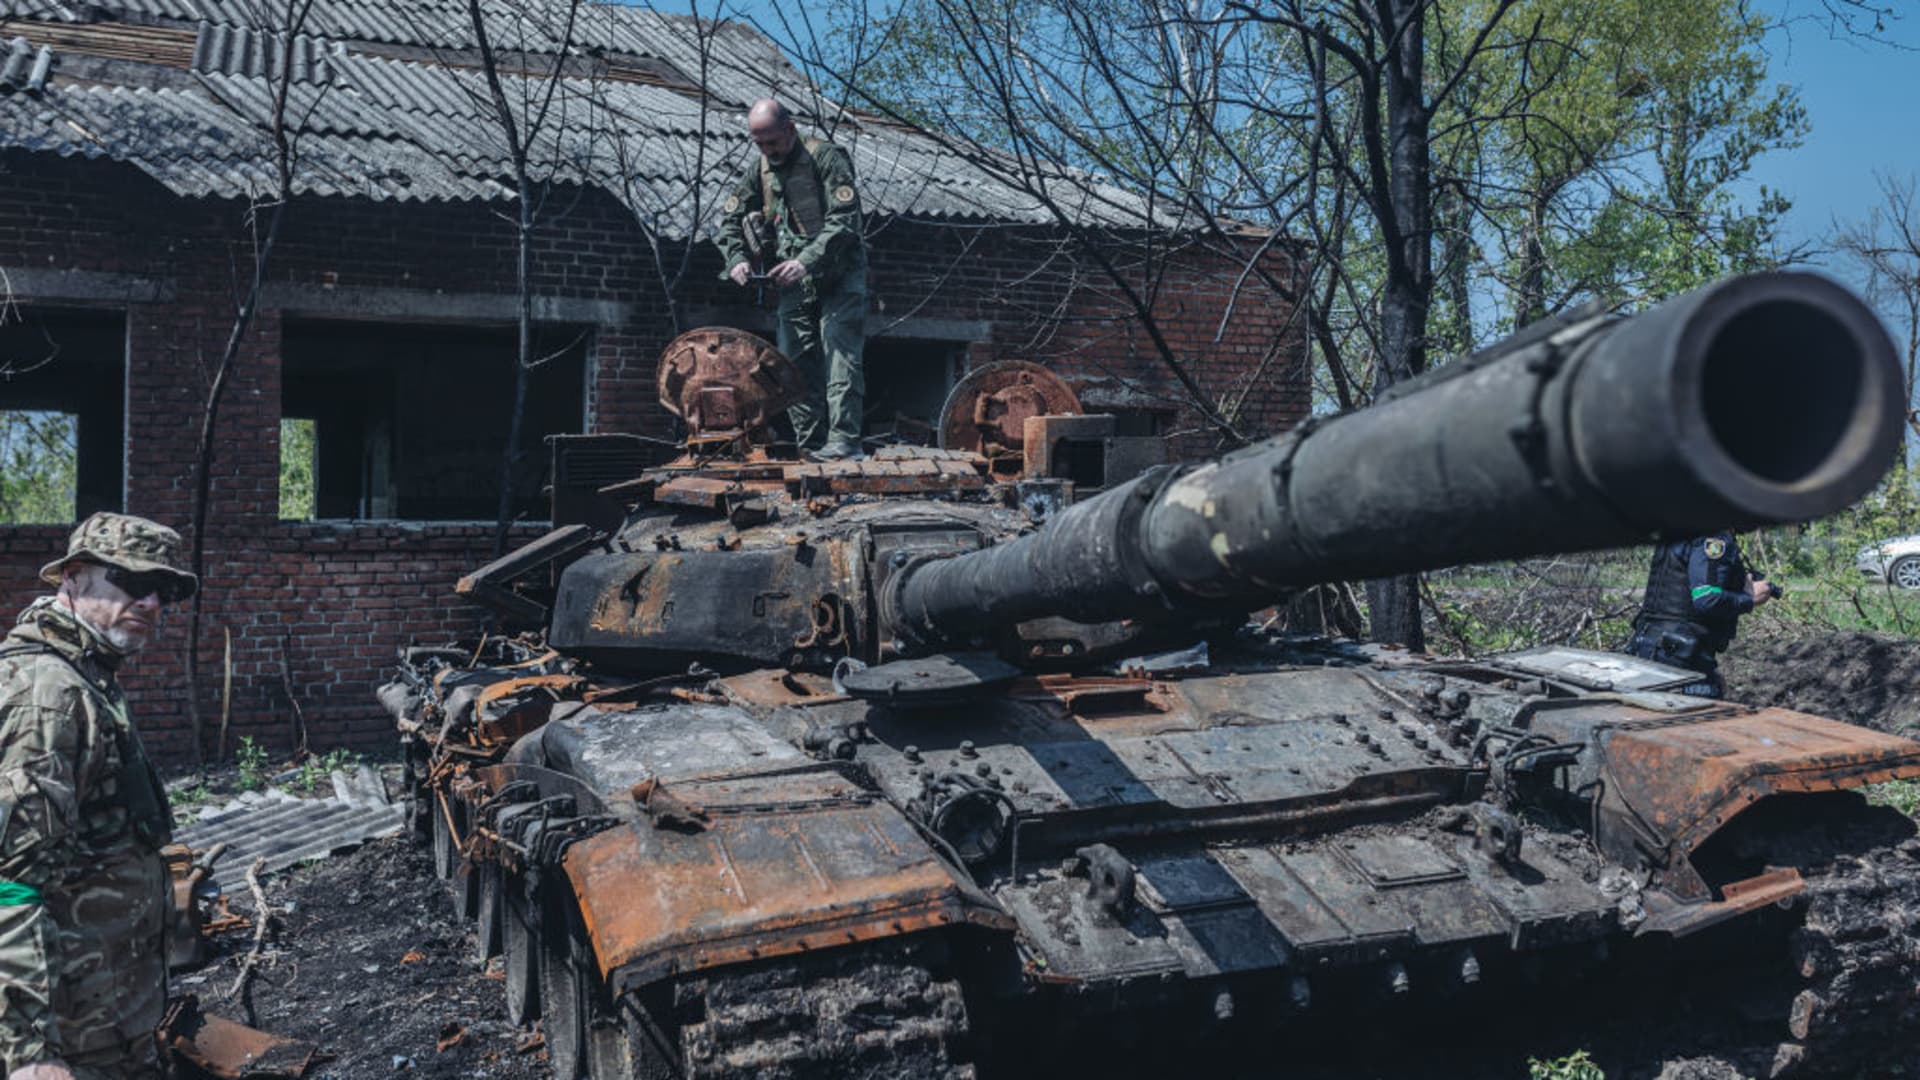 Ukrainian soldiers next to a destroyed Russian tank on the outskirts of Kharkiv, Ukraine, 8 May 2022.